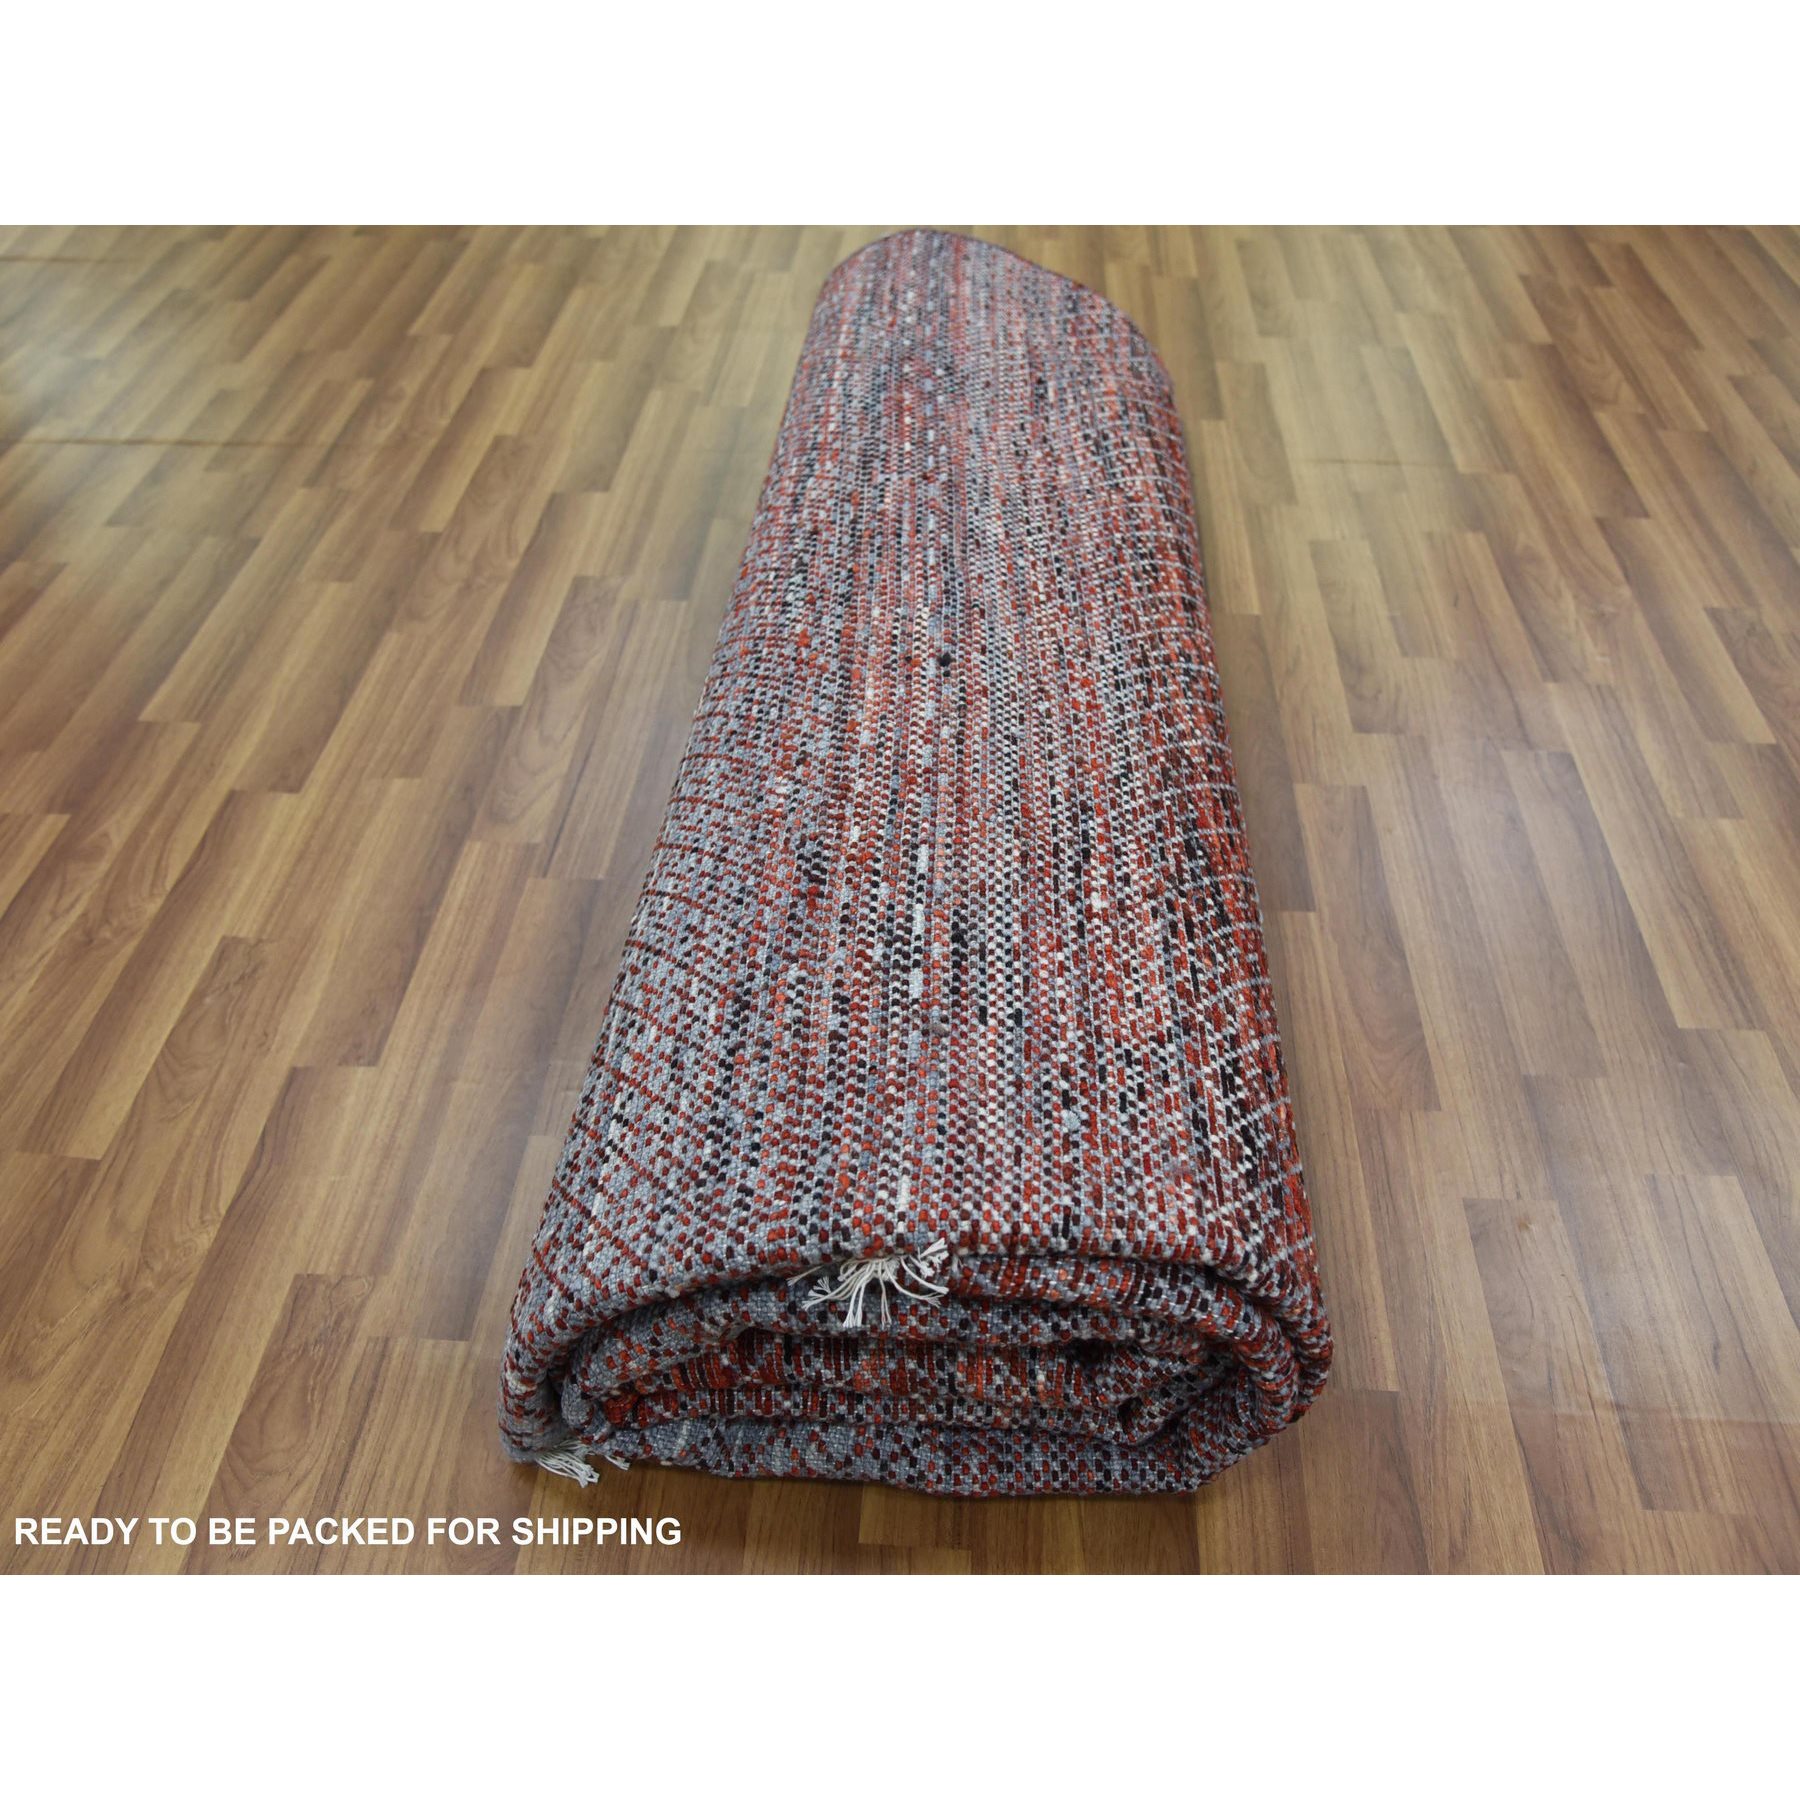 9'1"x12'1" Brownish Red, Hand Woven Modern Chiaroscuro Collection, Thick and Plush Pure Wool, Oriental Rug 